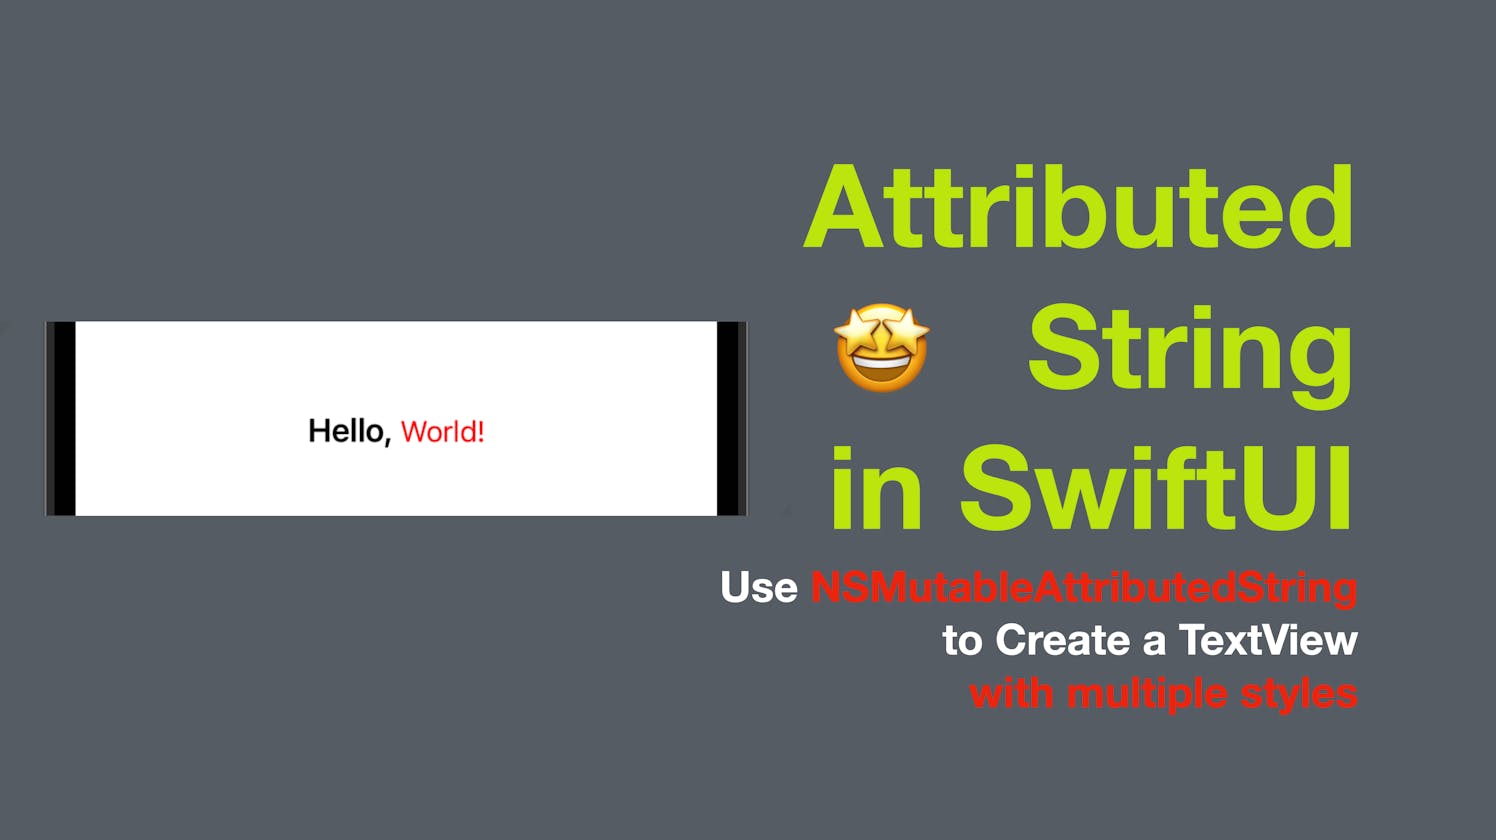 Attributed String in SwiftUI